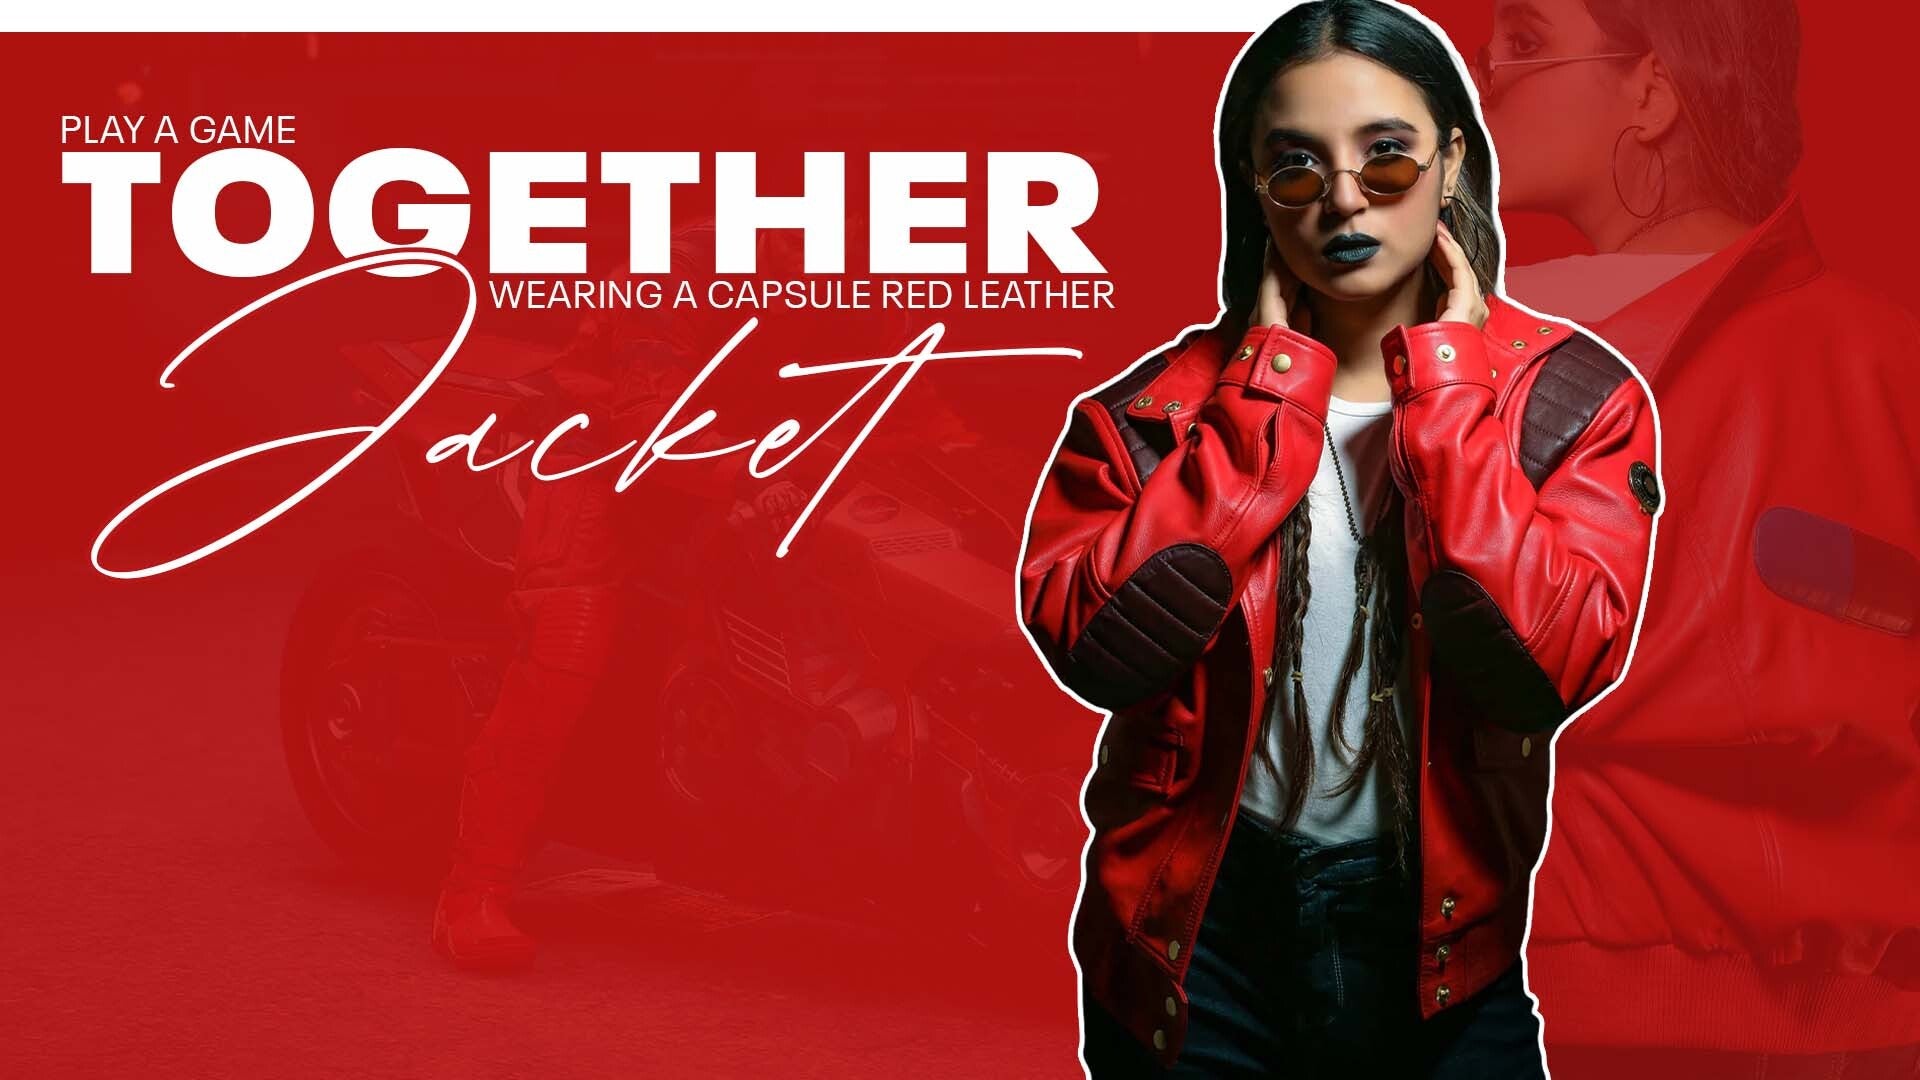 Play a Game Together Wearing a Capsule Red Leather Jacket